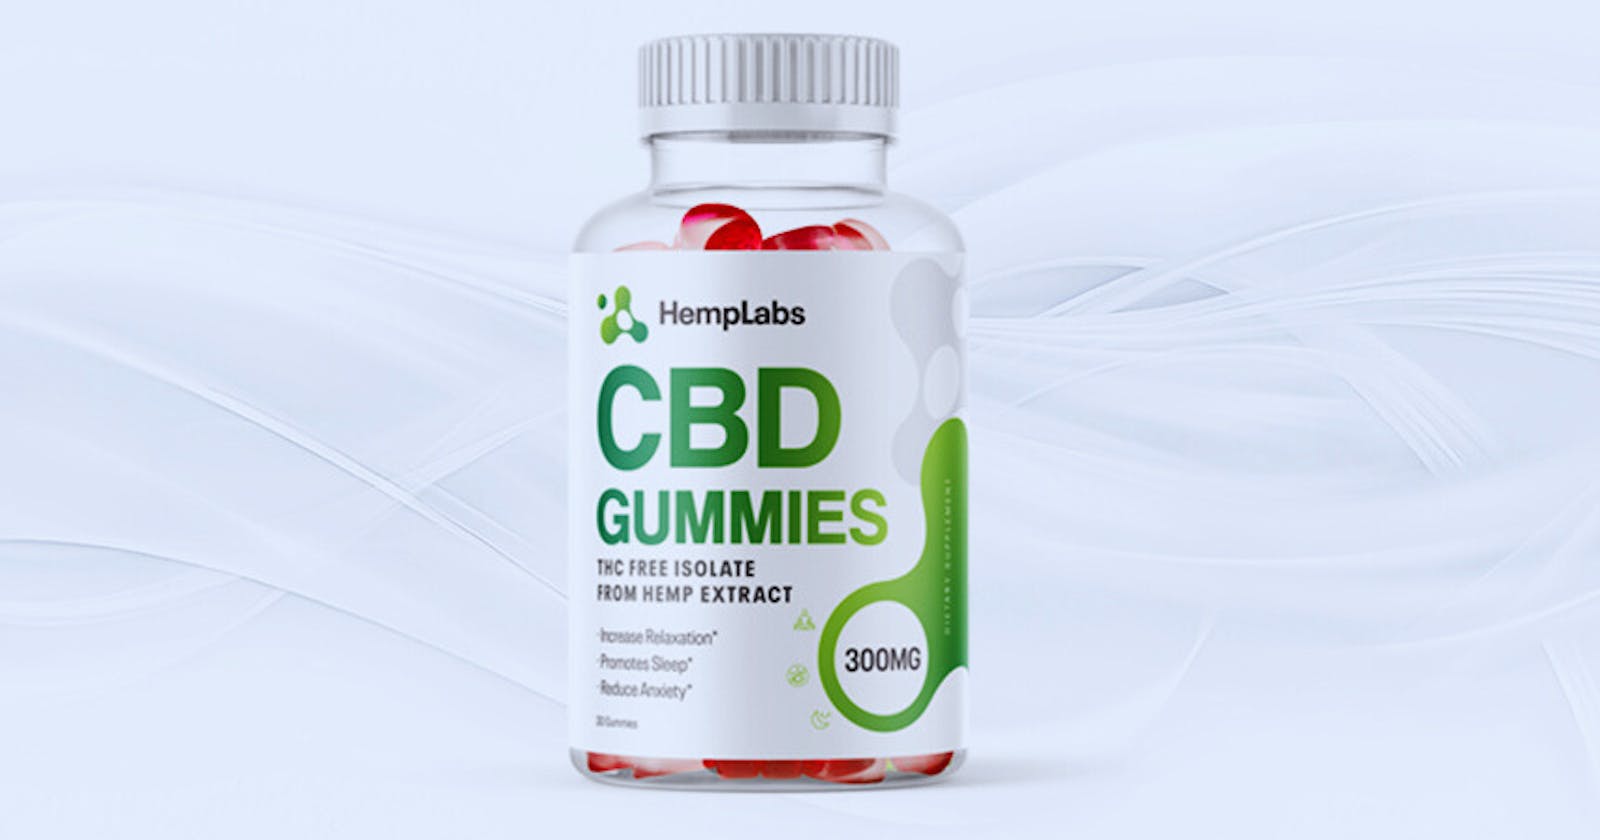 Delicious Relief: Hemp Labs CBD Gummies for Relaxation and Wellness